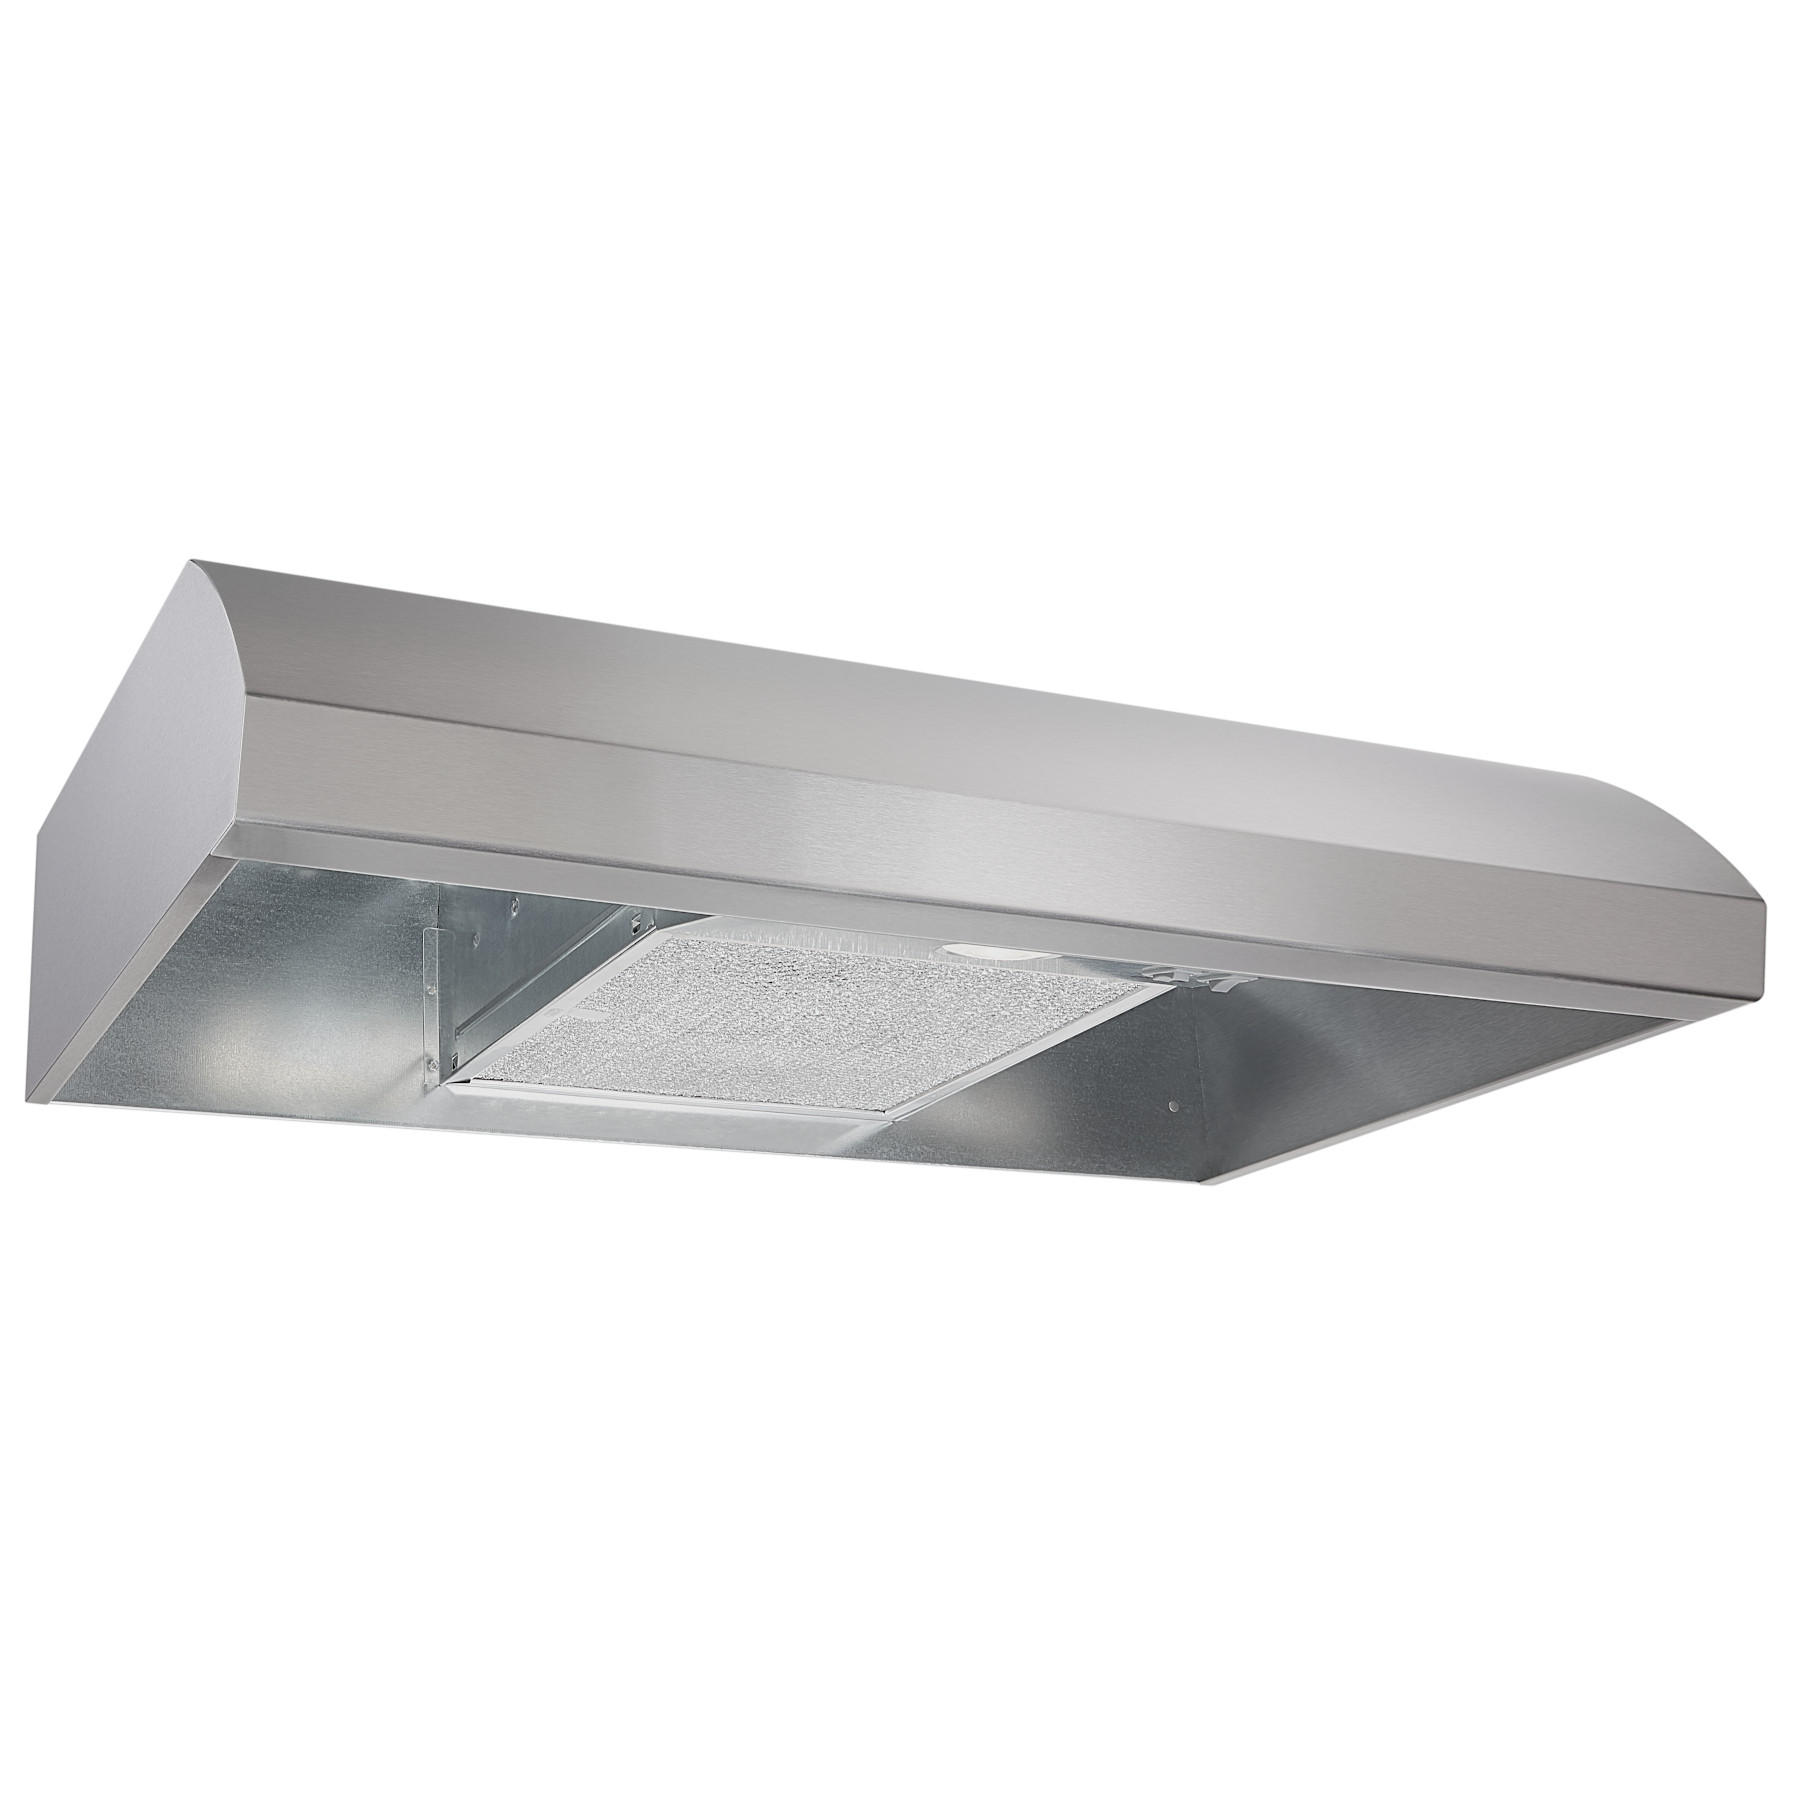 633118 30-Inch 2-Speed Under-Cabinet Non-Ducted Range Hood,SS Broan Mfg 